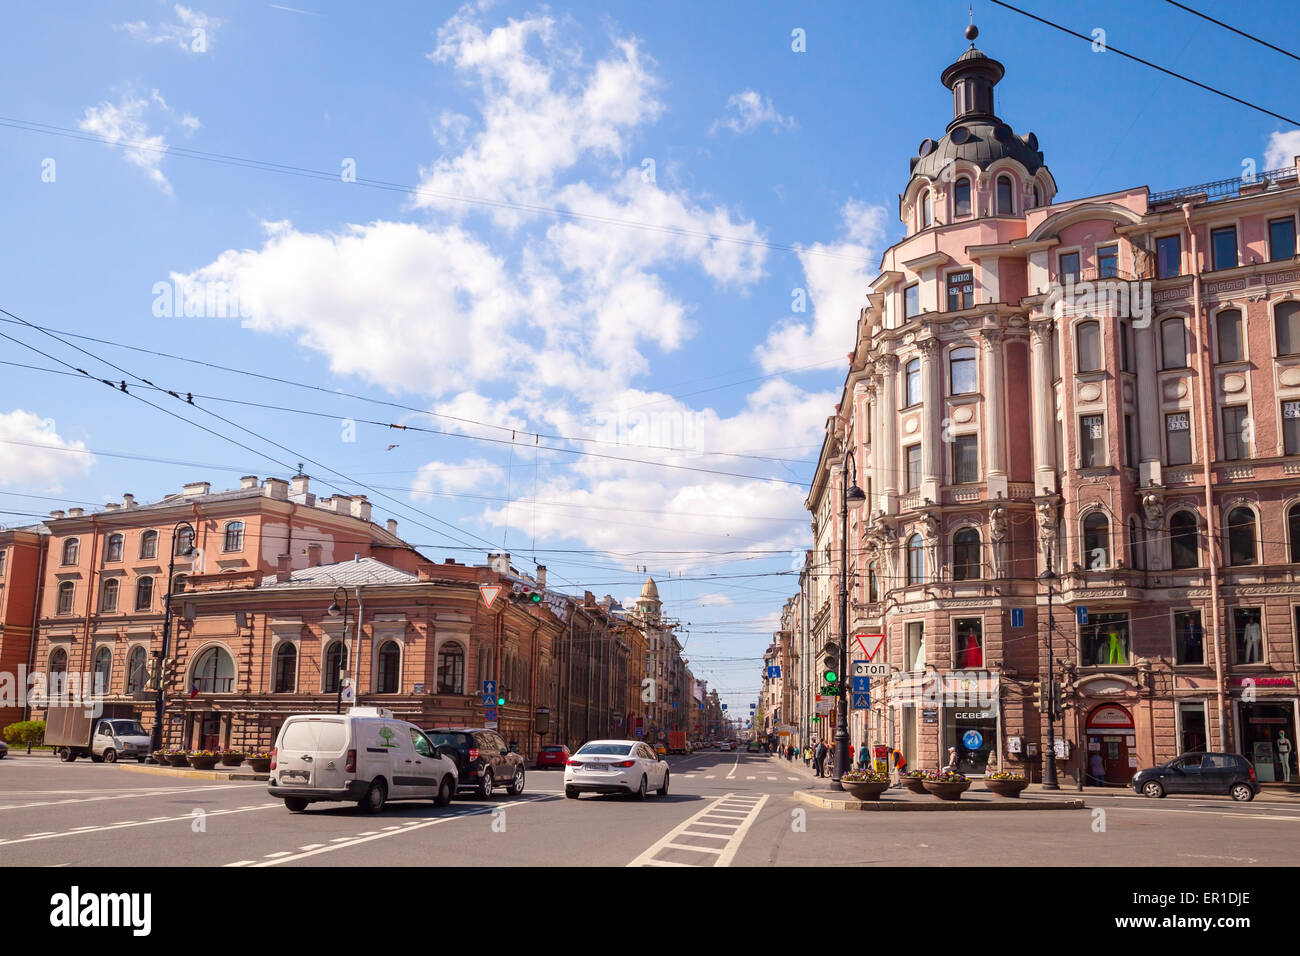 Saint-Petersburg, Russia - May 32, 2015: street view on central part of St.Petersburg, perspective of Bolshoy Prospekt Stock Photo